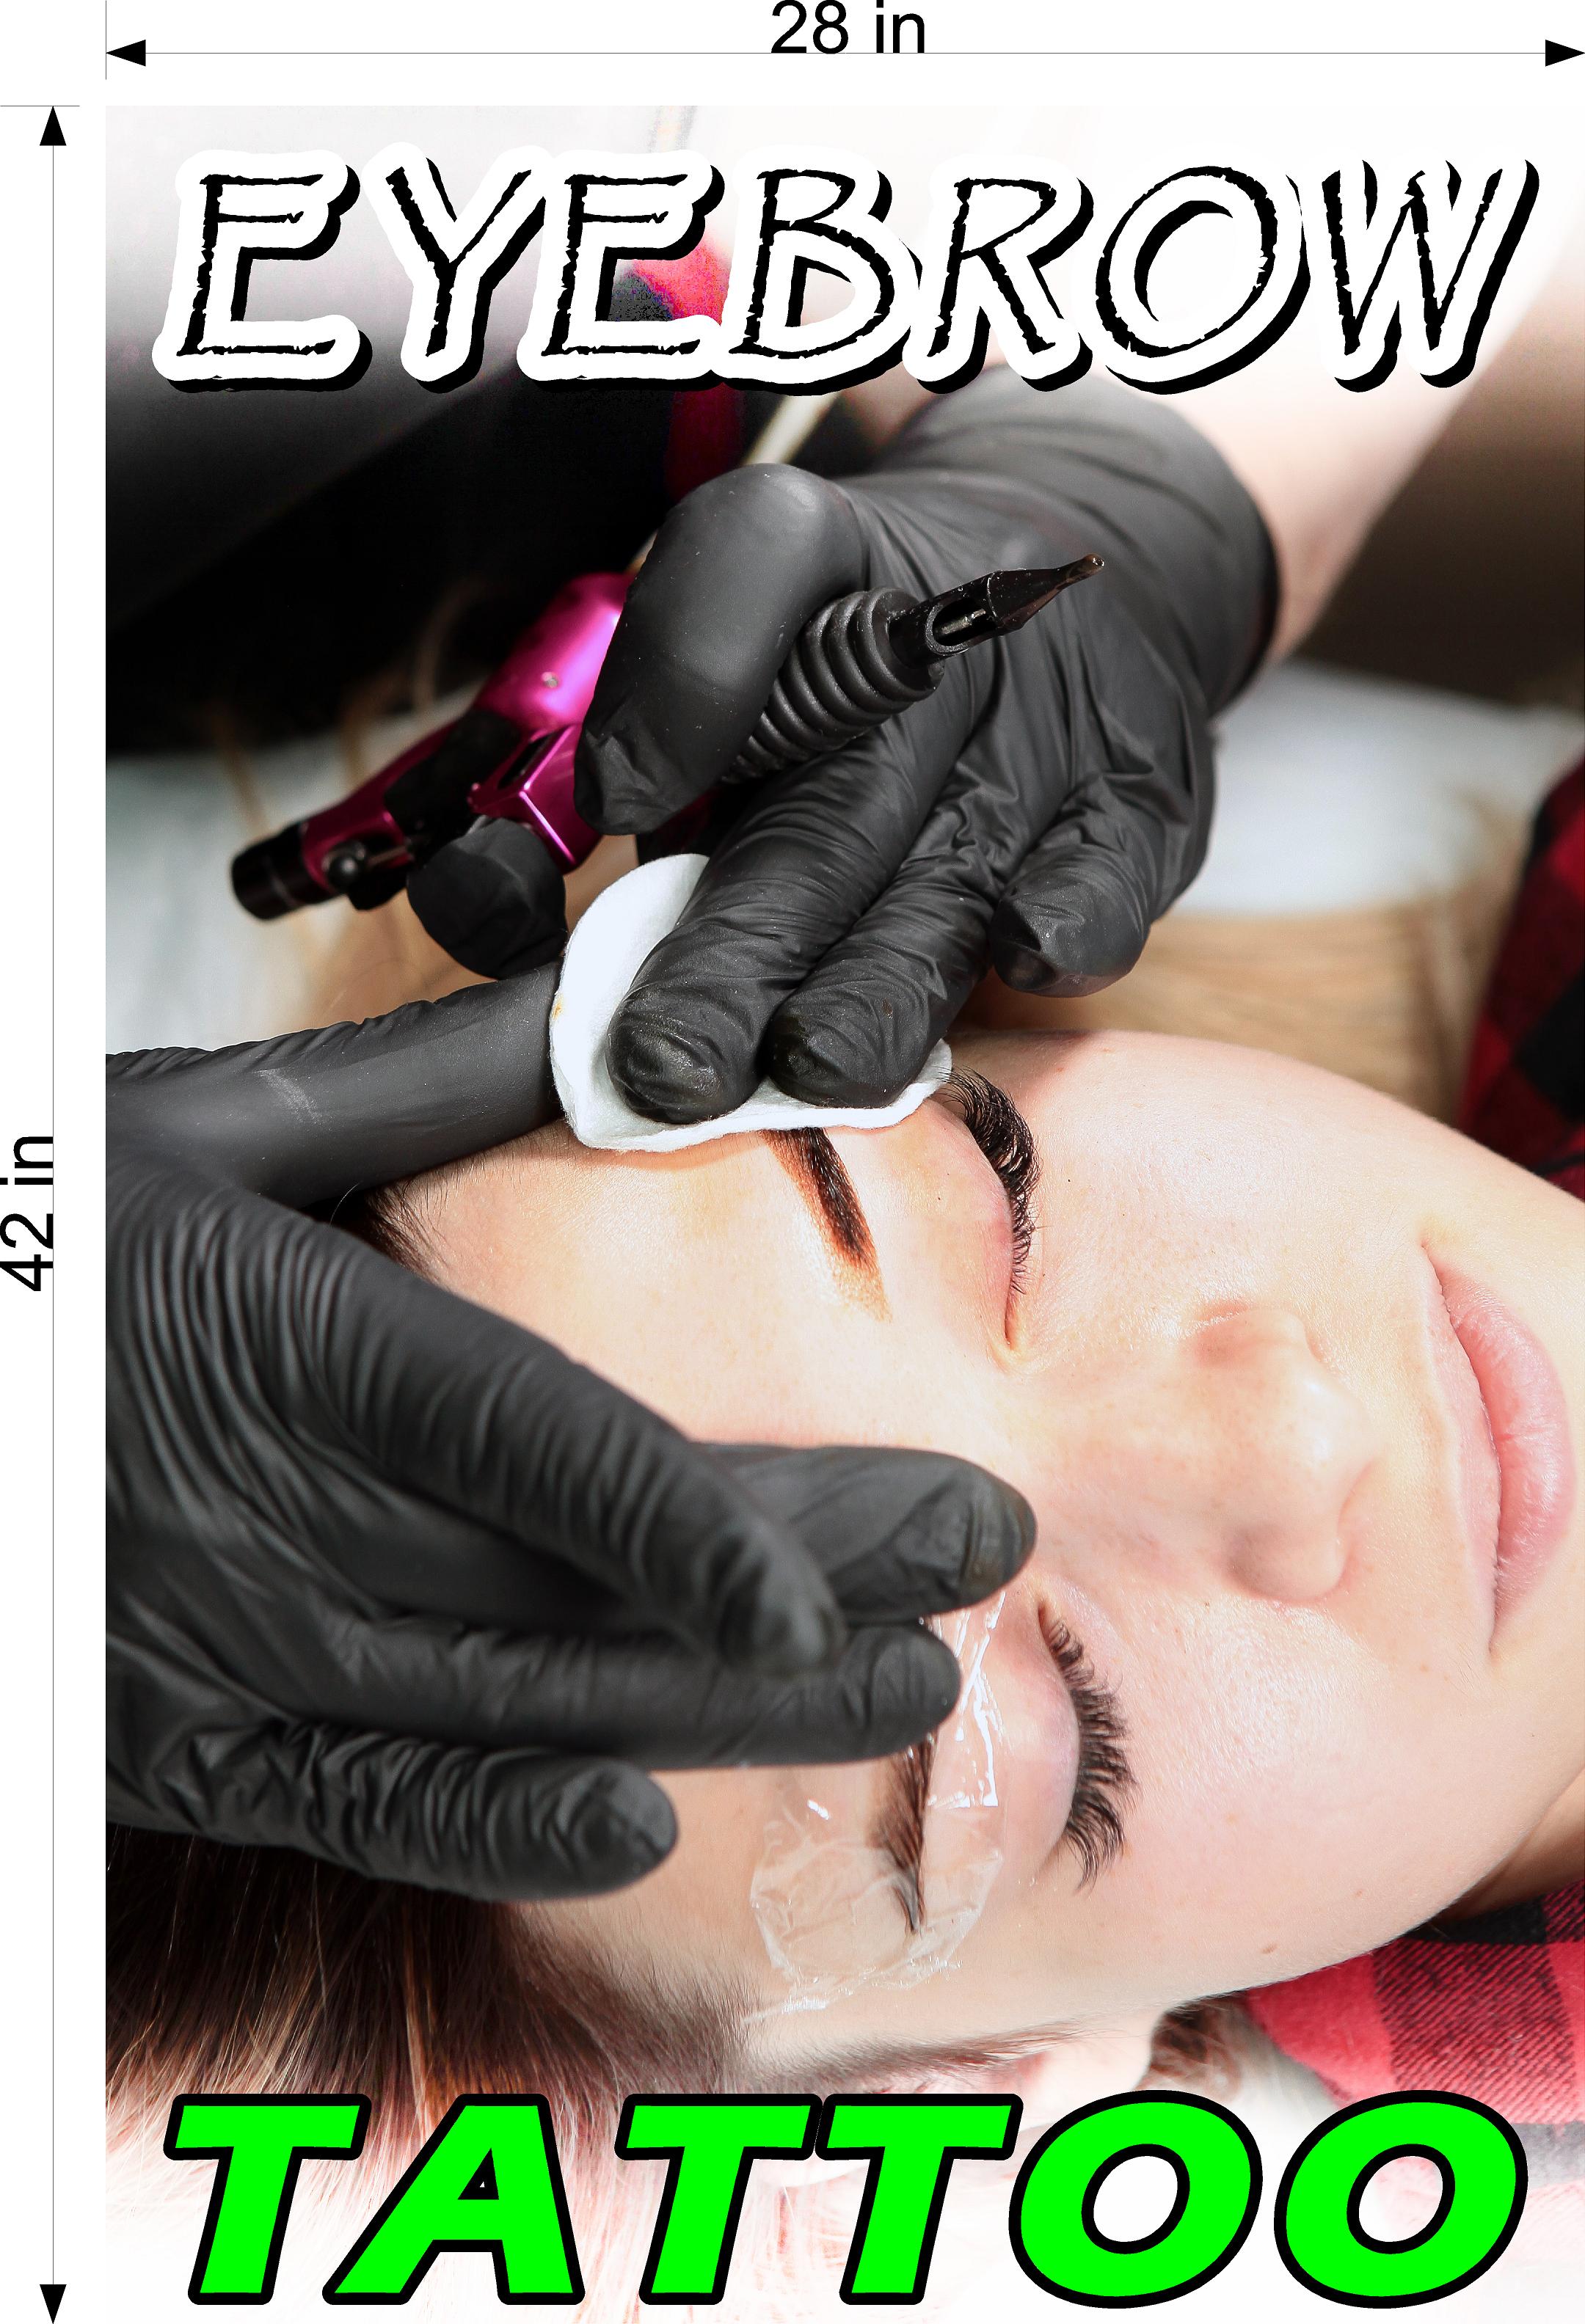 Flat 50% Offer On All Tattoos Above 20inches - Bob Tattoo Studio at Rs  250/inch in Bengaluru | ID: 2852949625248